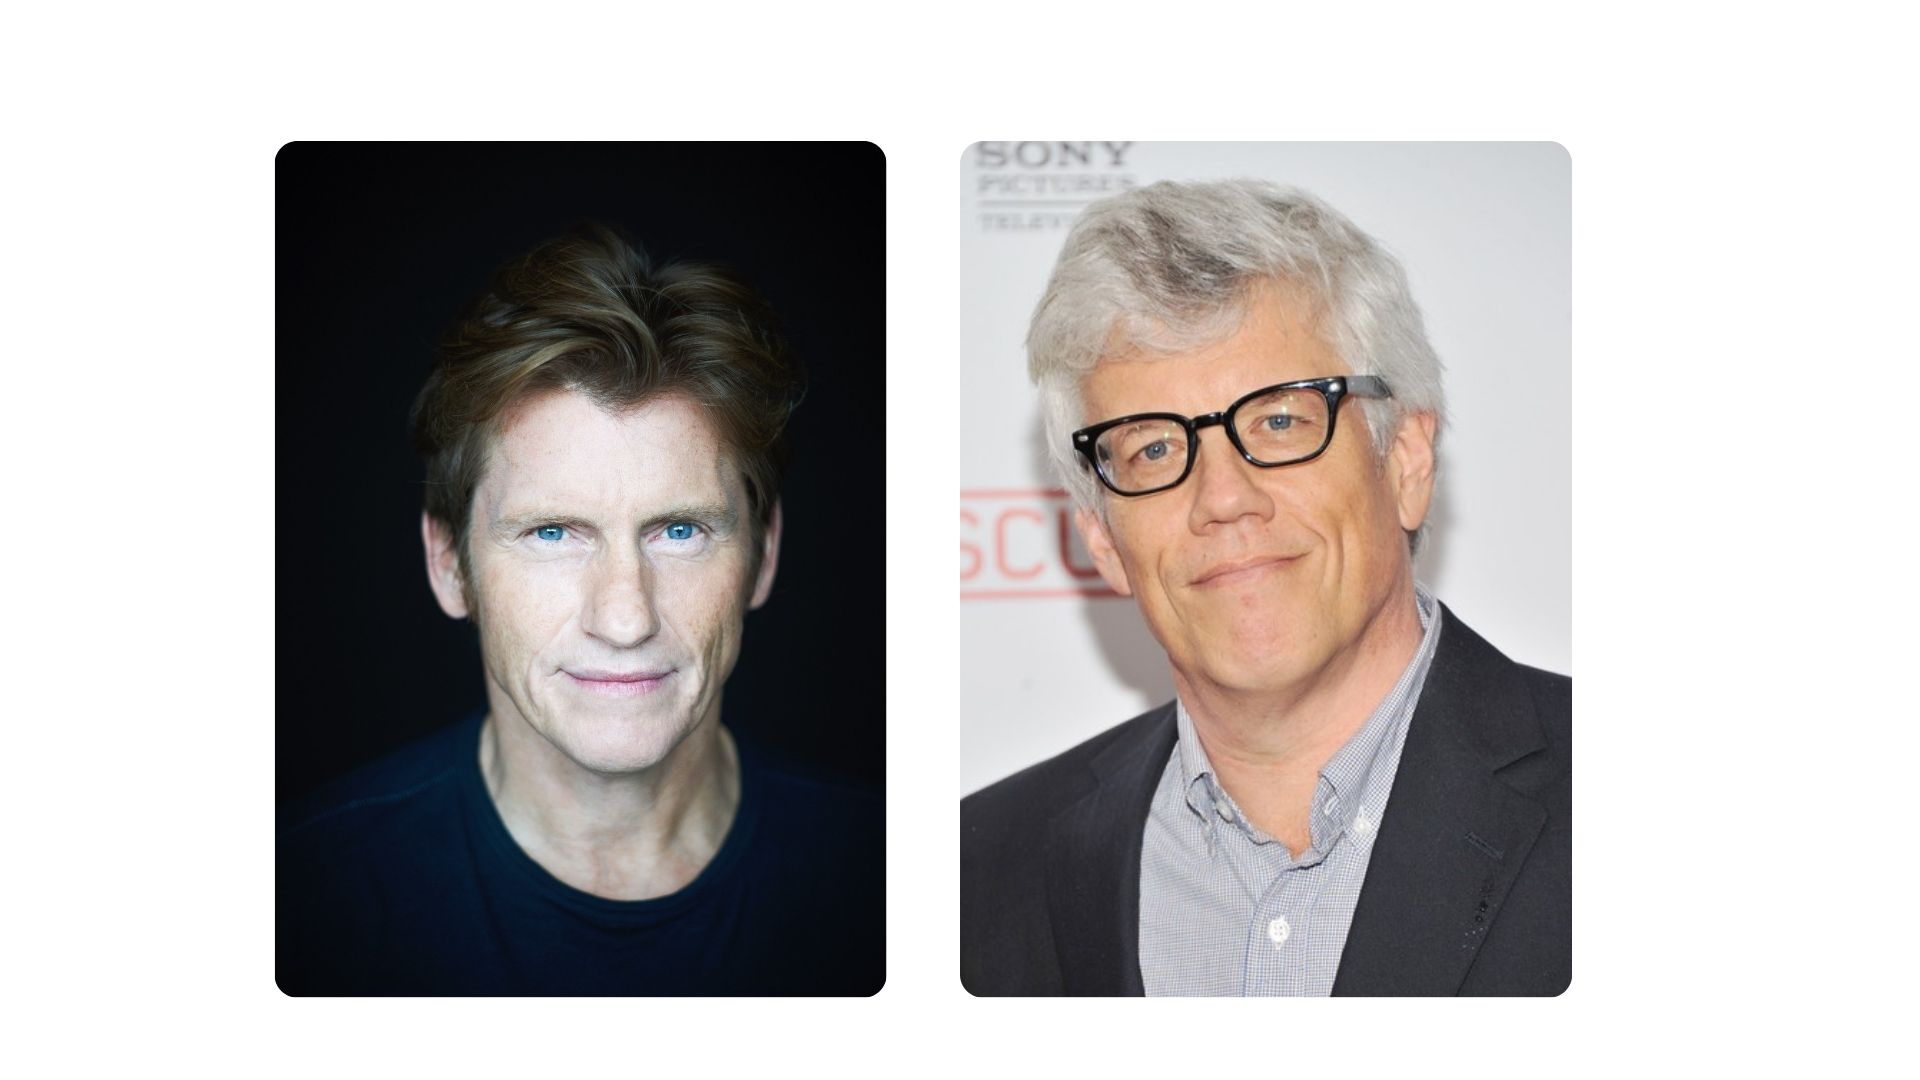 Color photo of Denis Leary (left) and Peter Tolan (right)